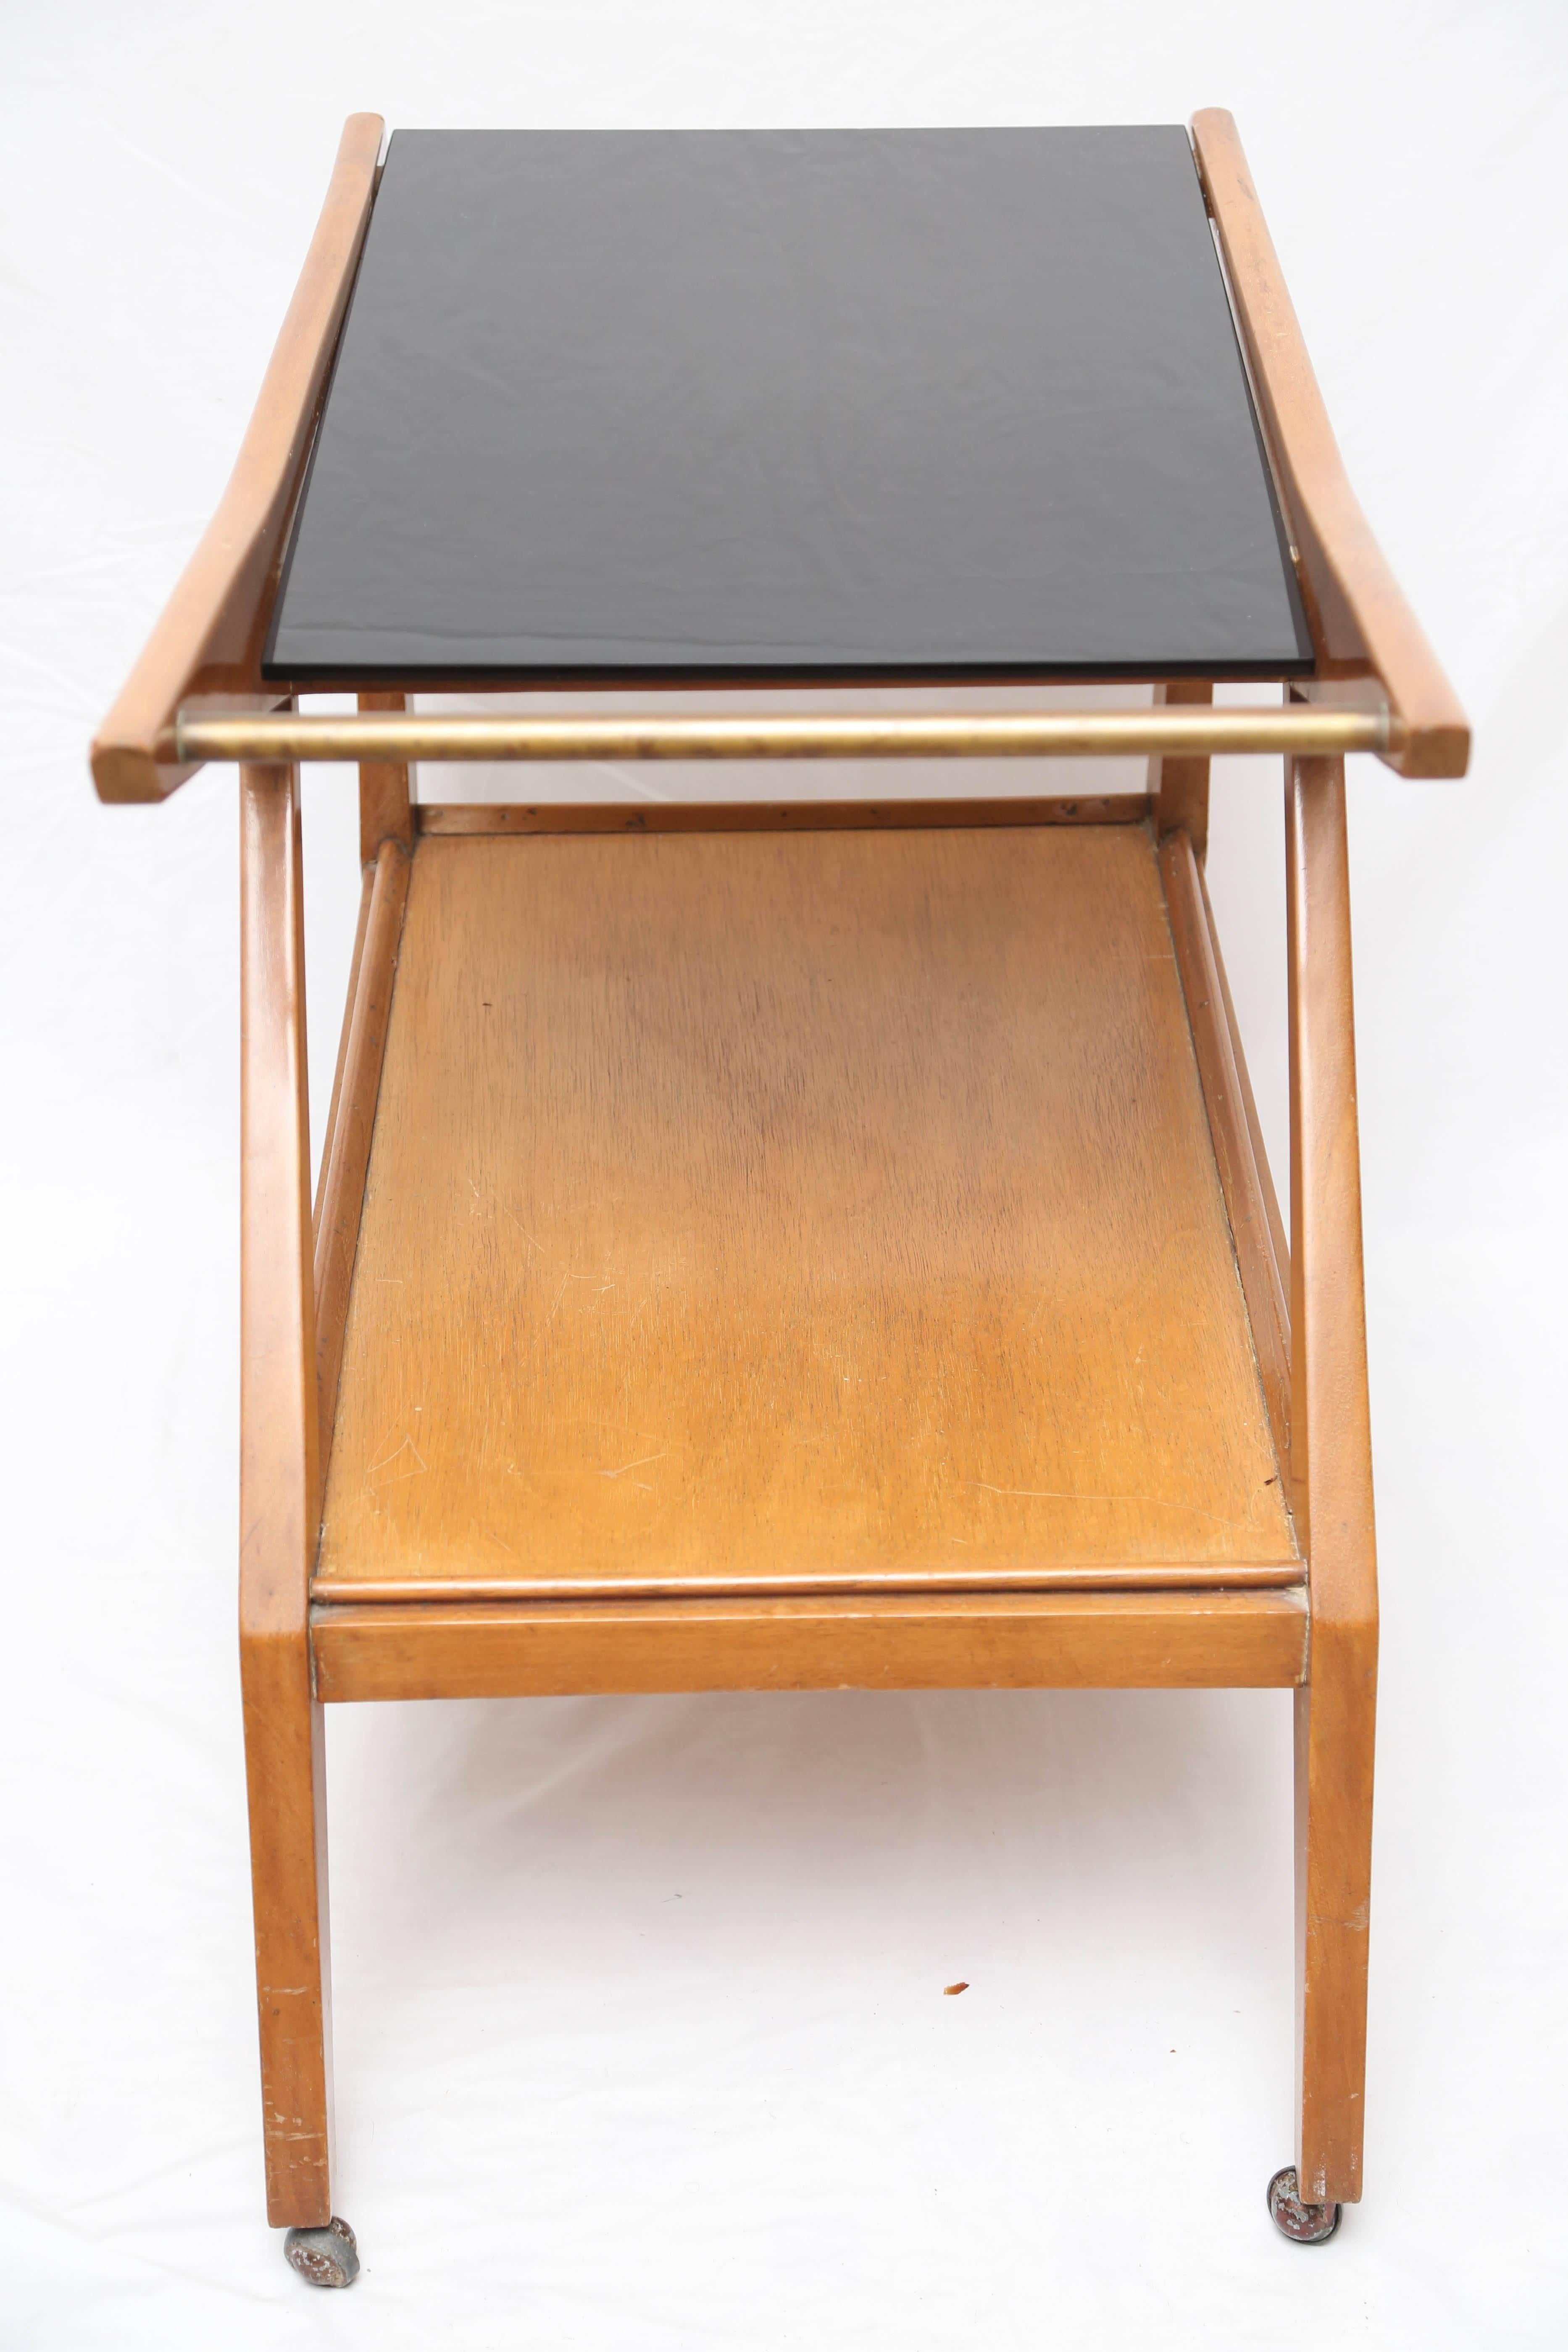 Wood, brass and glass Mid-Century Modern bar cart by Tilly Stickell.